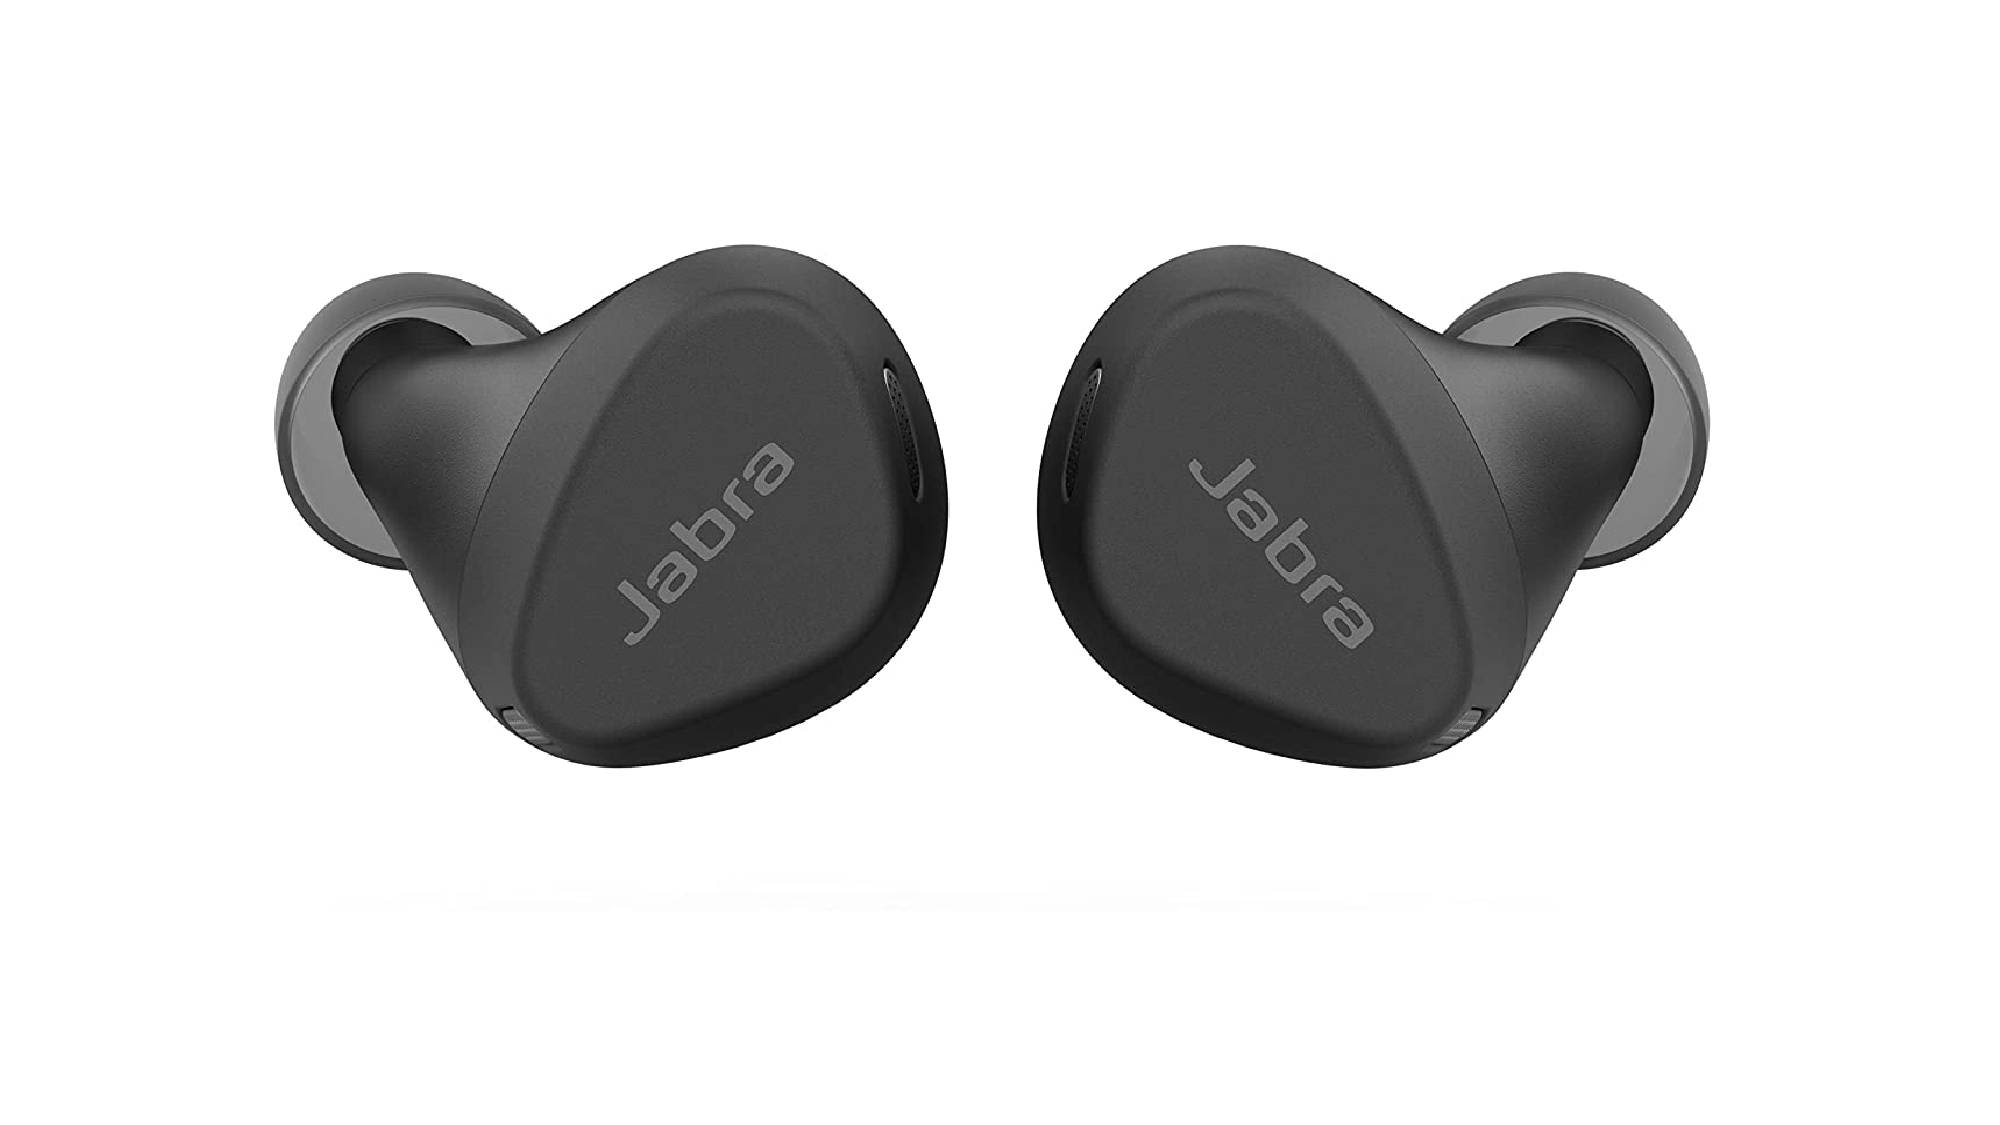 Jabra's workout-ready Elite 4 Active earbuds are now available for $120